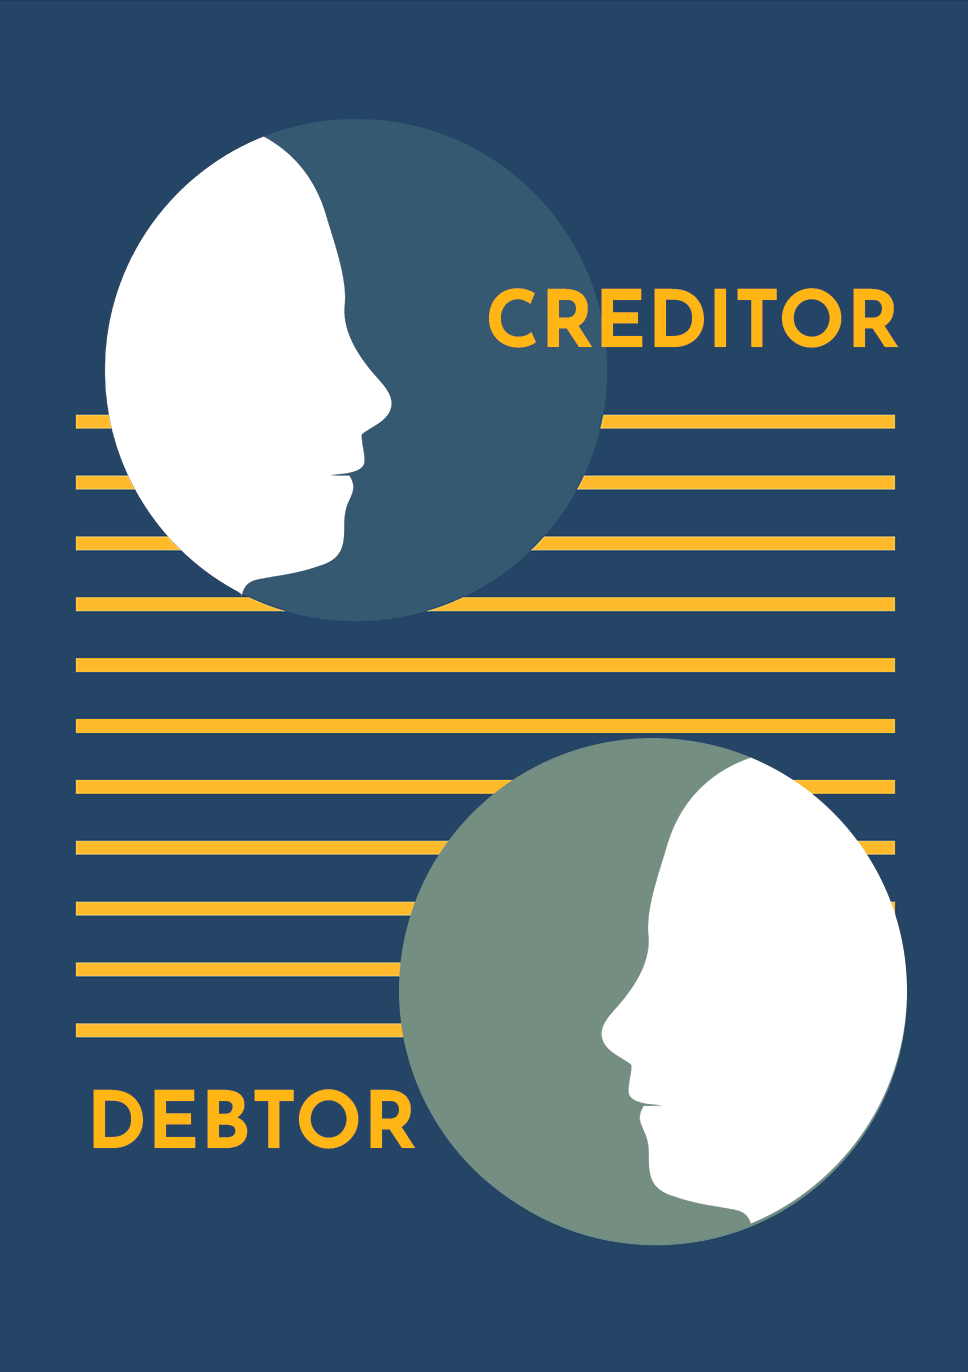 Image of two silhouettes of a side profile: one representing a judgement debtor, the other, a creditor.